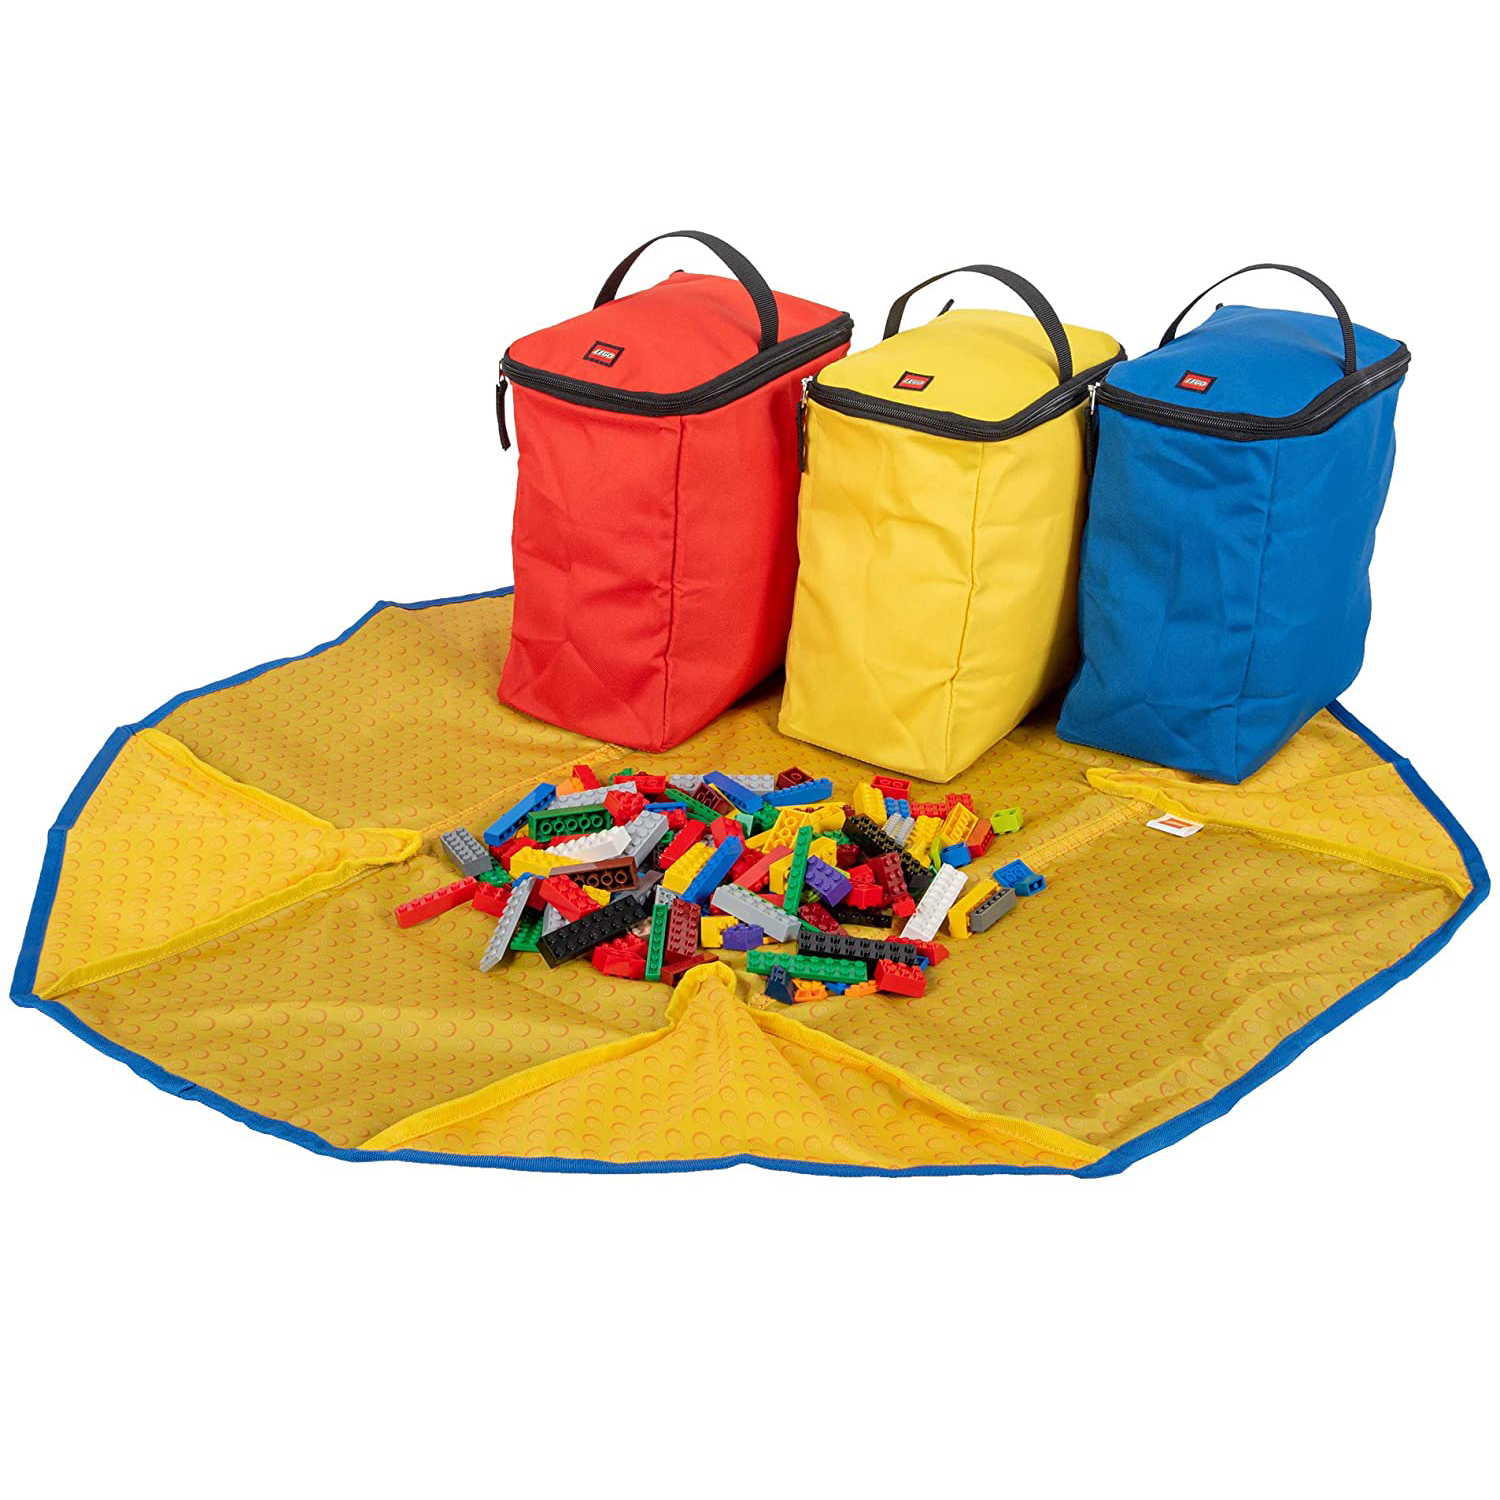 Best Lego Storage Tote: Lego Storage 4-Piece Tote and Play Mat 